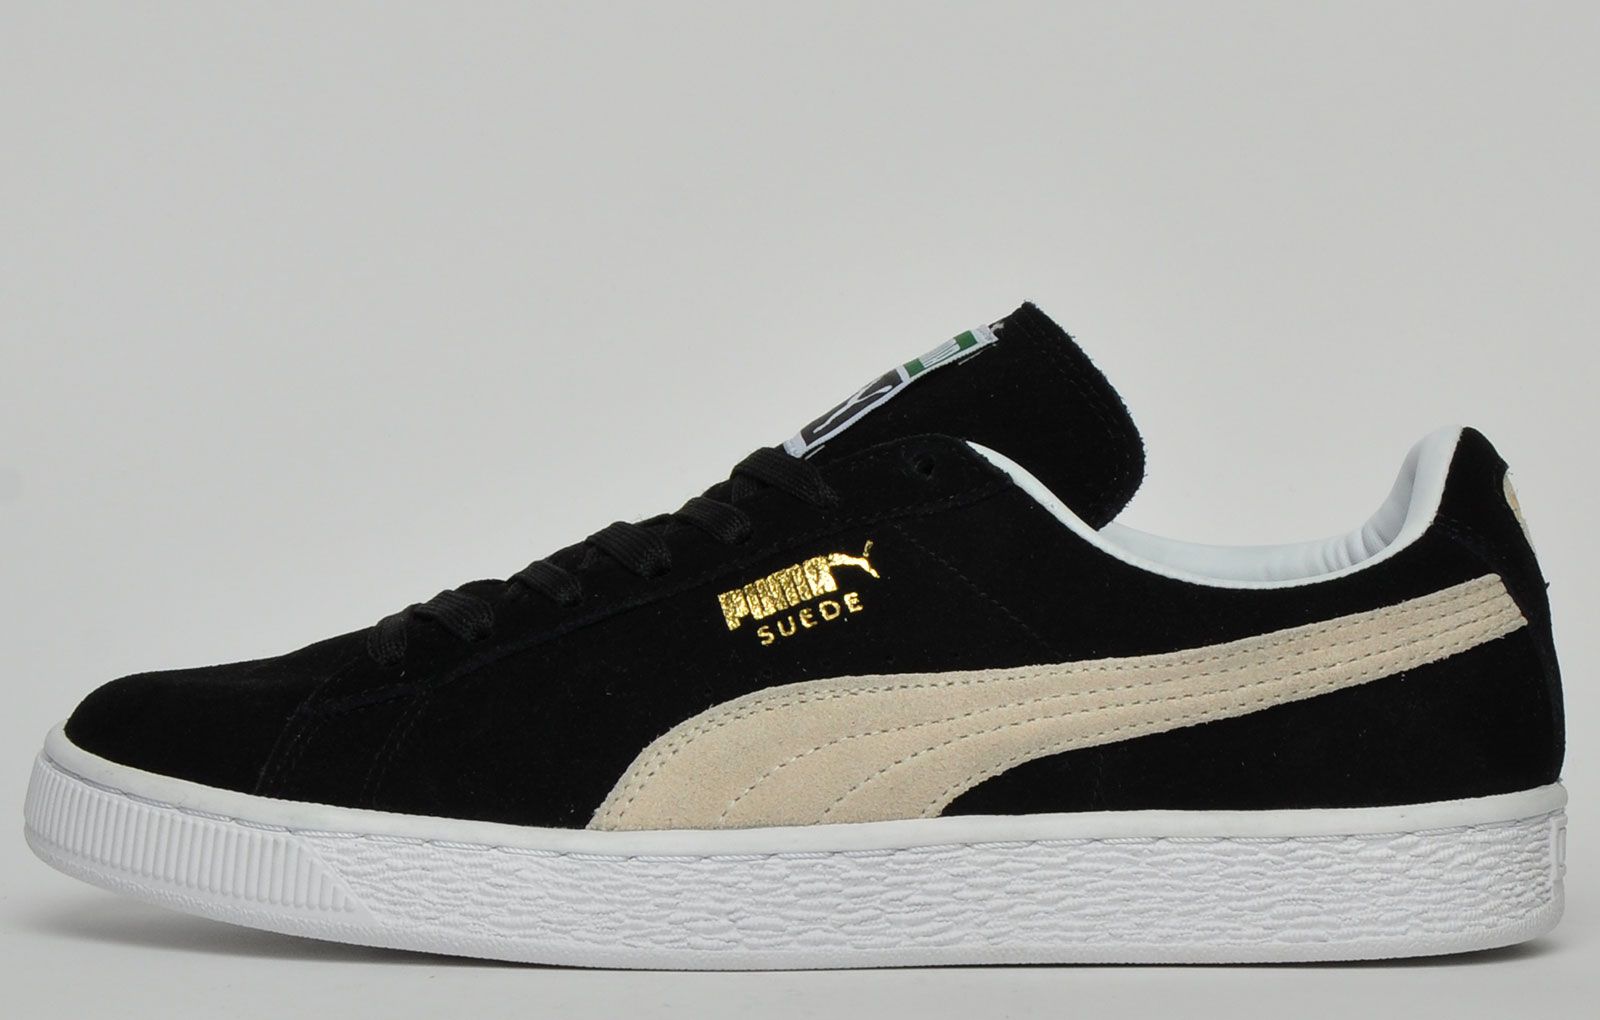 <p>The famous Puma Suede originally started its life as a basketball shoe in the 60s before receiving its hero cult status it now has due to trainer enthusiasts around the world falling for its amazing looks and great street appeal. A very stylish trainer sitting at the forefront of retro trainer appeal of the modern day. Inspired with that old school charm in mind, straight from the court this is an updated classic that will never go out of fashion and which takes, comfort, durability, and styling to the next level. This Puma Suede has an unmissable charm and creates the perfect trainer for individuals who want retro style and luxurious comfort all combined into one. Crafted in a premium suede leather with a Puma form stripe this is the epitome of a super cool trainer at an affordable price. Puma signature branding appears to the side upper and a full Puma Cat logo is also visible to the tongue. These suede’s have a padded heel and ankle arch for a comfortable fit and feature a contrasting textured midsole well suited to the rigors of an active lifestyle. </p> <p>- Premium suede leather upper</p> <p> - Secure lace up system </p> <p>- vintage styled wrap around sole</p> <p>- Additional cushioning and added ankle support</p> <p>- Durable outsole with treaded design for added grip</p> <p>- Puma branding throughout </p>